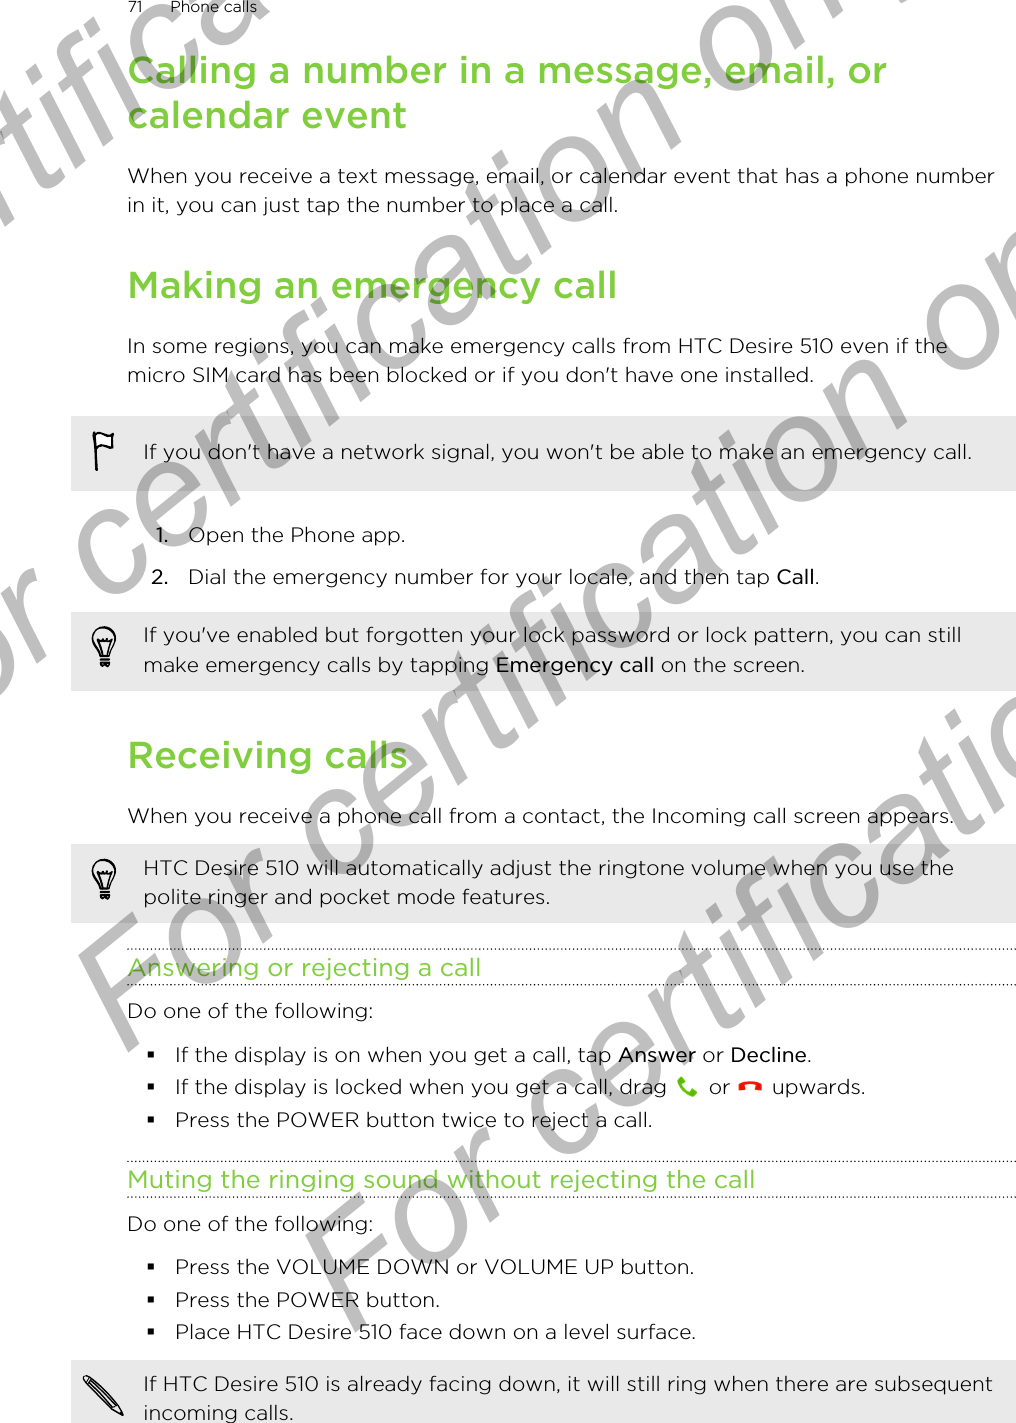 Calling a number in a message, email, orcalendar eventWhen you receive a text message, email, or calendar event that has a phone numberin it, you can just tap the number to place a call.Making an emergency callIn some regions, you can make emergency calls from HTC Desire 510 even if themicro SIM card has been blocked or if you don&apos;t have one installed.If you don&apos;t have a network signal, you won&apos;t be able to make an emergency call.1. Open the Phone app.2. Dial the emergency number for your locale, and then tap Call.If you&apos;ve enabled but forgotten your lock password or lock pattern, you can stillmake emergency calls by tapping Emergency call on the screen.Receiving callsWhen you receive a phone call from a contact, the Incoming call screen appears.HTC Desire 510 will automatically adjust the ringtone volume when you use thepolite ringer and pocket mode features.Answering or rejecting a callDo one of the following:§If the display is on when you get a call, tap Answer or Decline.§If the display is locked when you get a call, drag   or   upwards.§Press the POWER button twice to reject a call.Muting the ringing sound without rejecting the callDo one of the following:§Press the VOLUME DOWN or VOLUME UP button.§Press the POWER button.§Place HTC Desire 510 face down on a level surface.If HTC Desire 510 is already facing down, it will still ring when there are subsequentincoming calls.71 Phone callsFor certification only  For certification only  For certification only  For certification only 